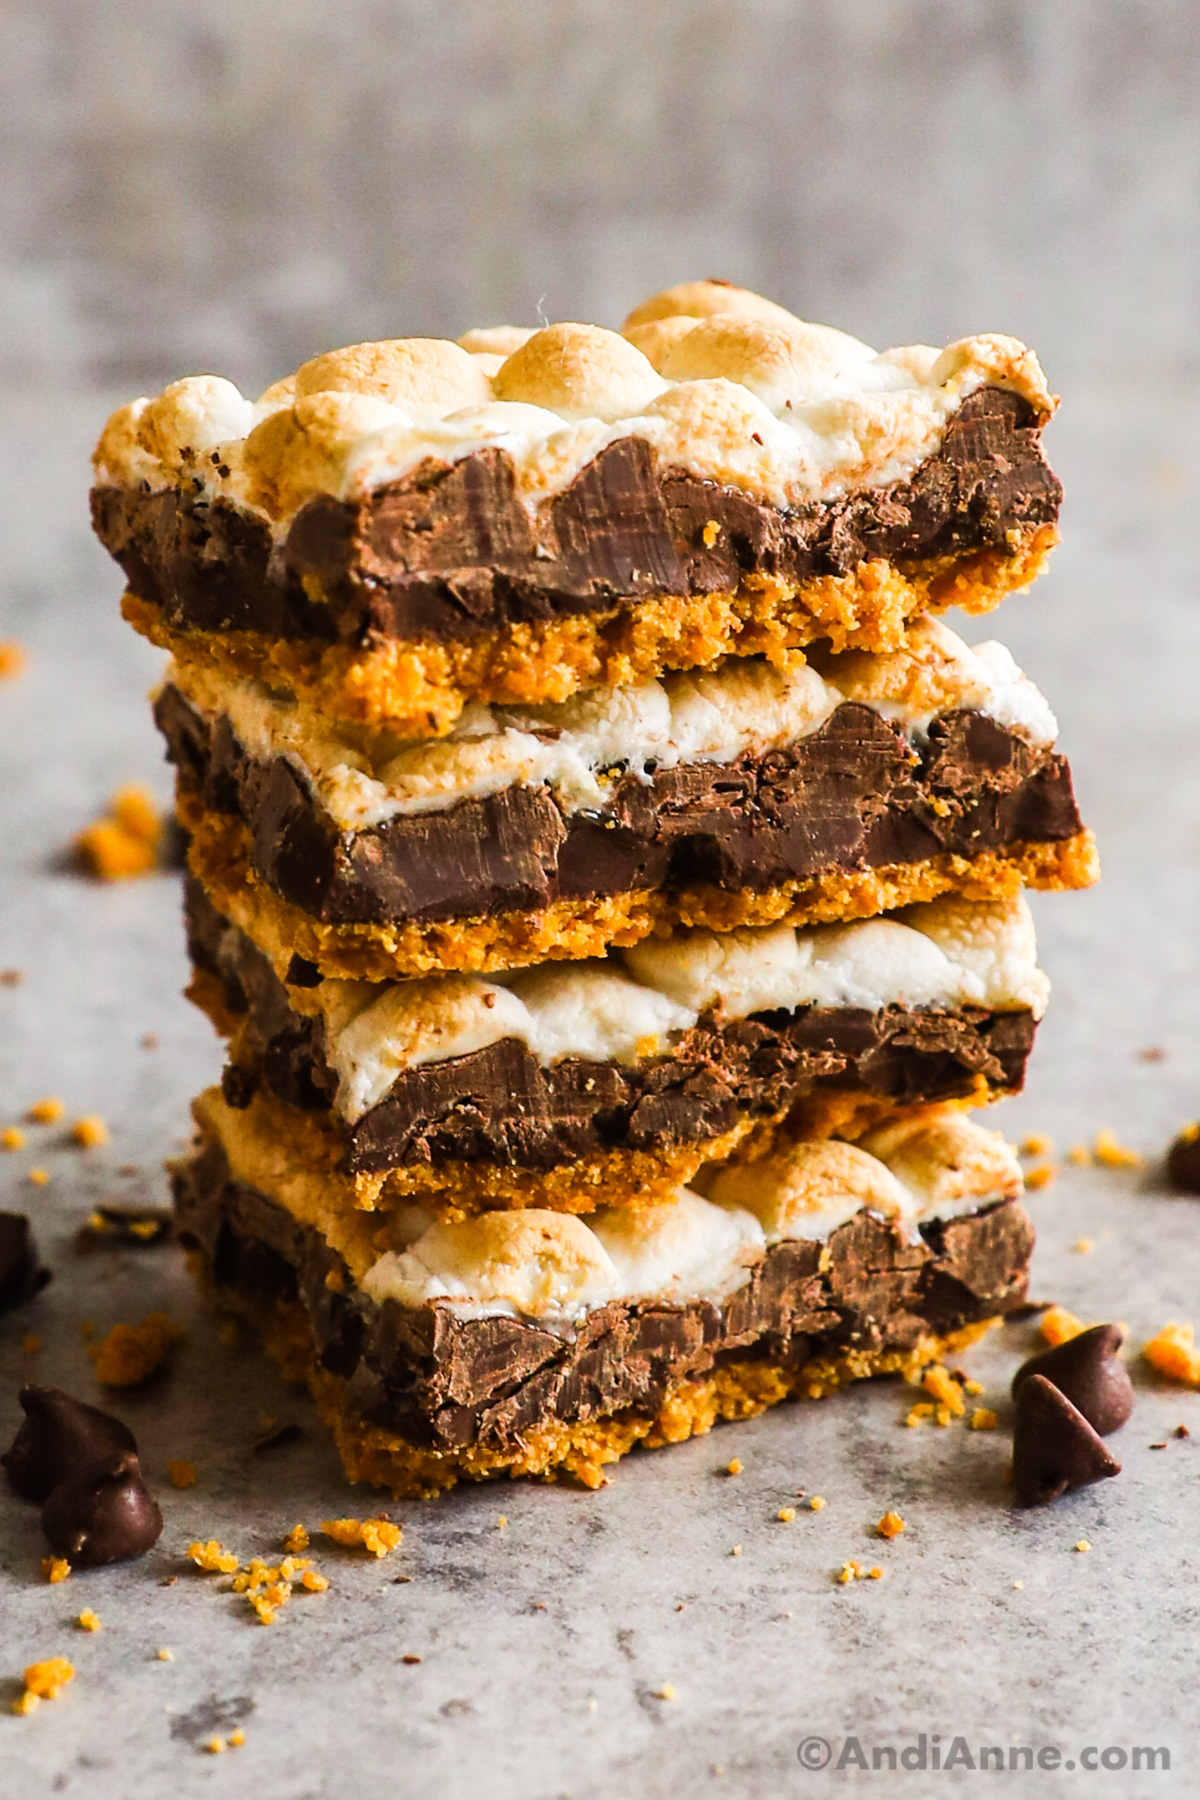 Stack of four squarely cut slices of finished s'more bars.